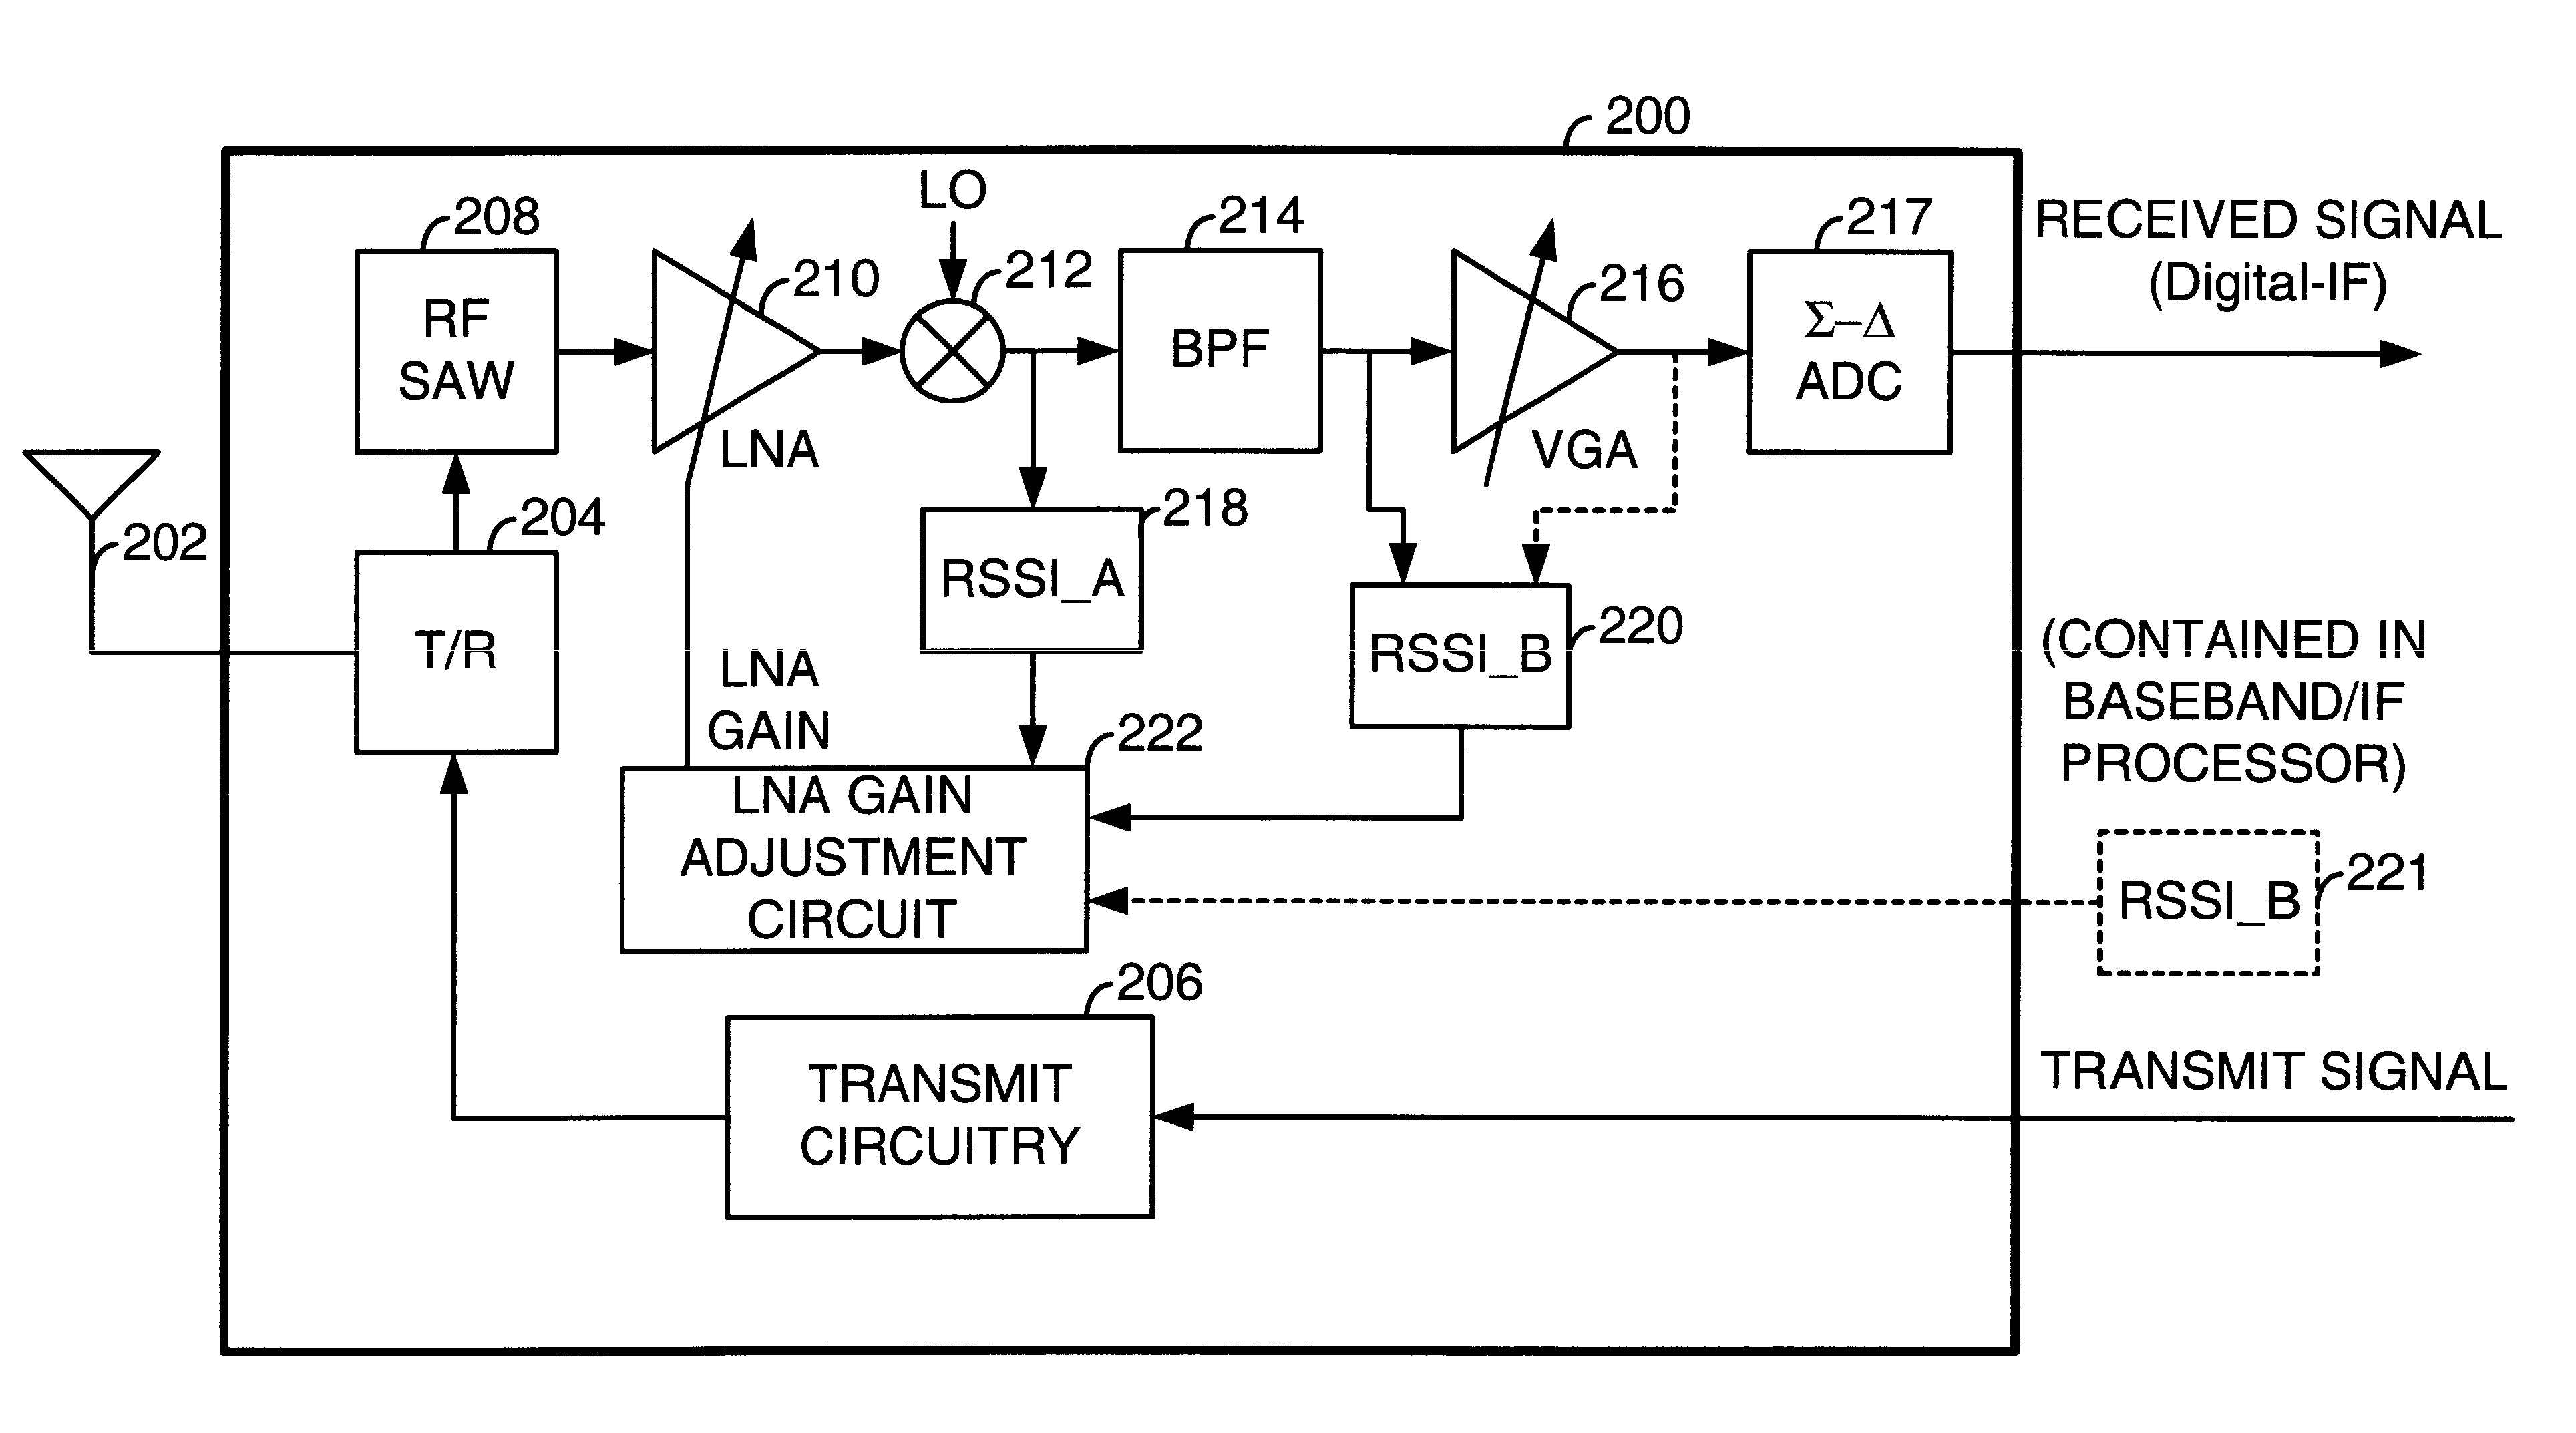 Timing based LNA gain adjustment in an RF receiver to compensate for intermodulation interference